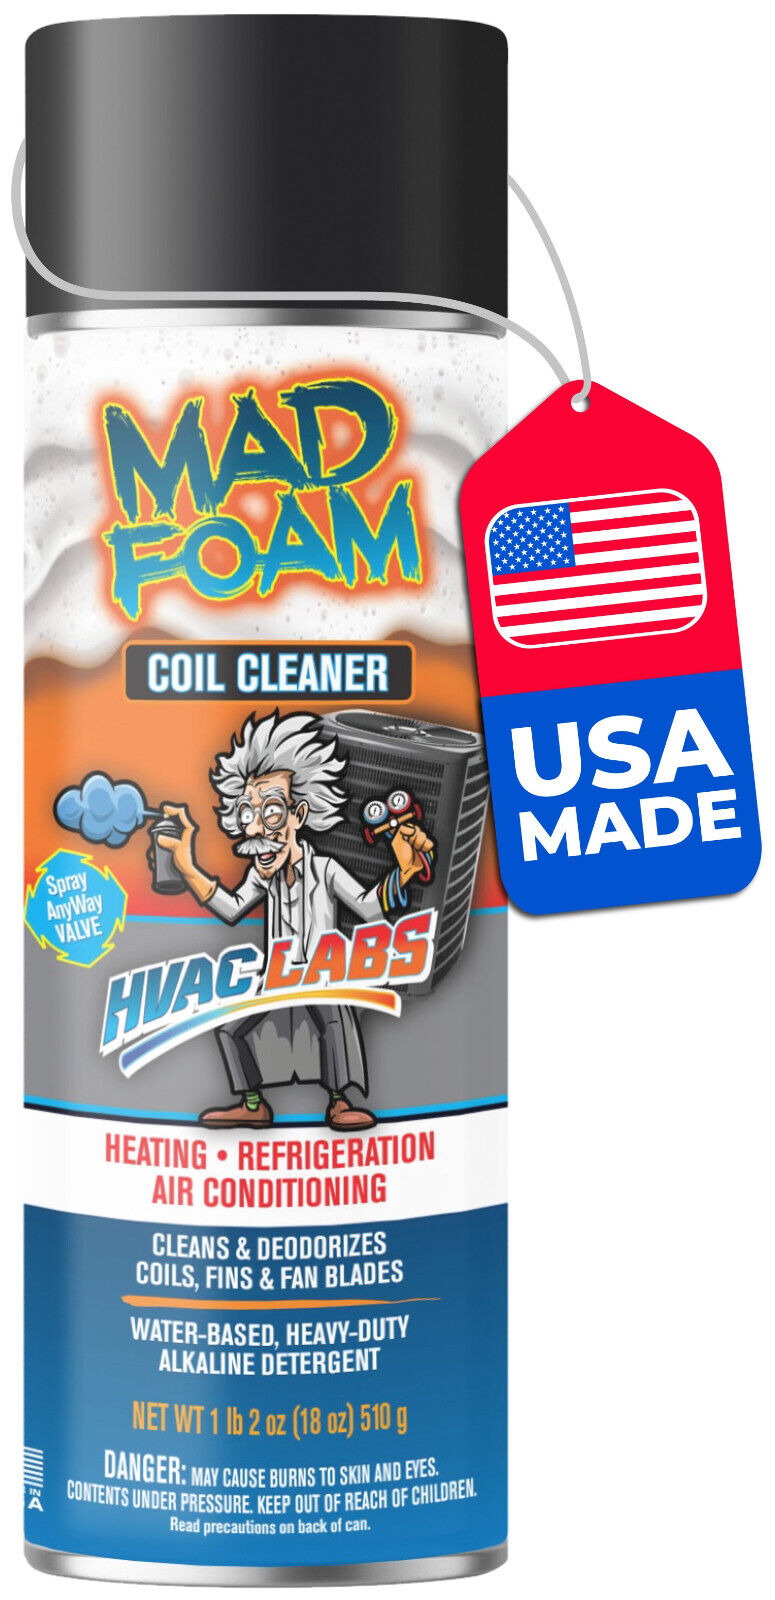 HVAC LABS Mad Foam AC Coil Cleaner Foaming for AC Heating & Refrigeration Unit